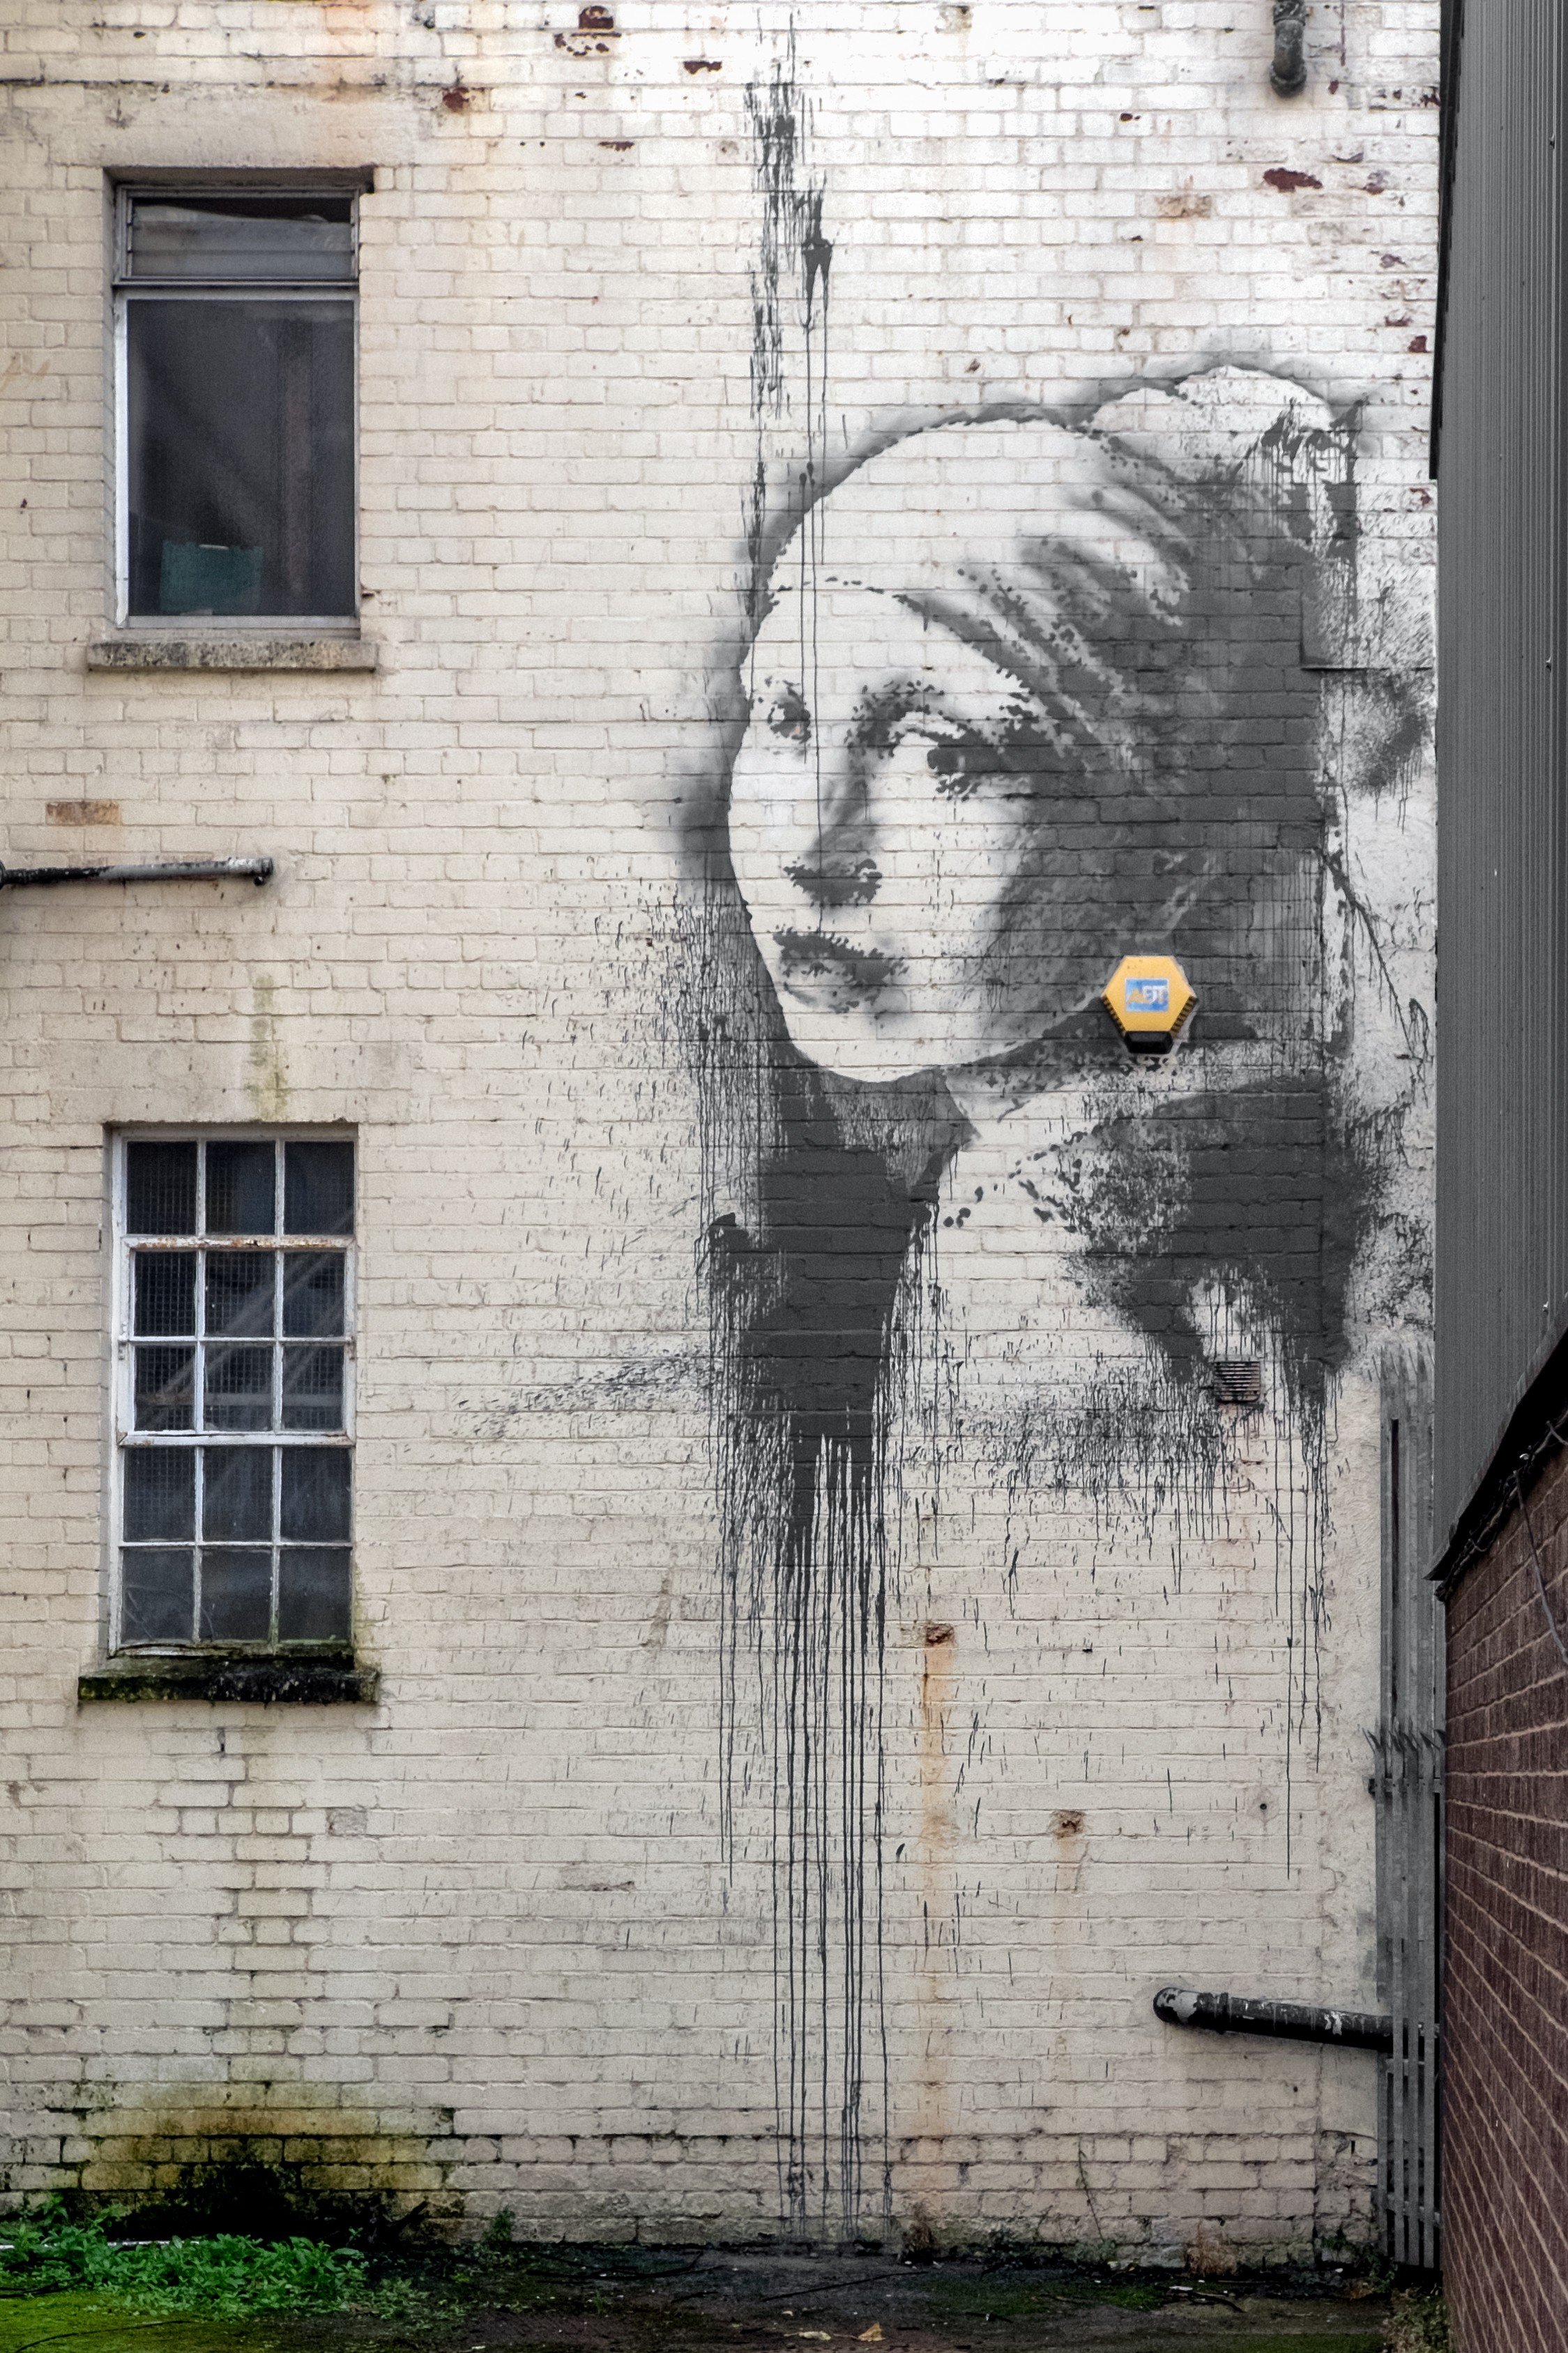 The new Banksy depicting the painting 'Girl with a Pearl Earring' by Dutch painter Johannes Vermeer is see on a wall in Bristol Harbourside, England on Oct. 20, 2014. (Paul Green—Demotix/Corbis)